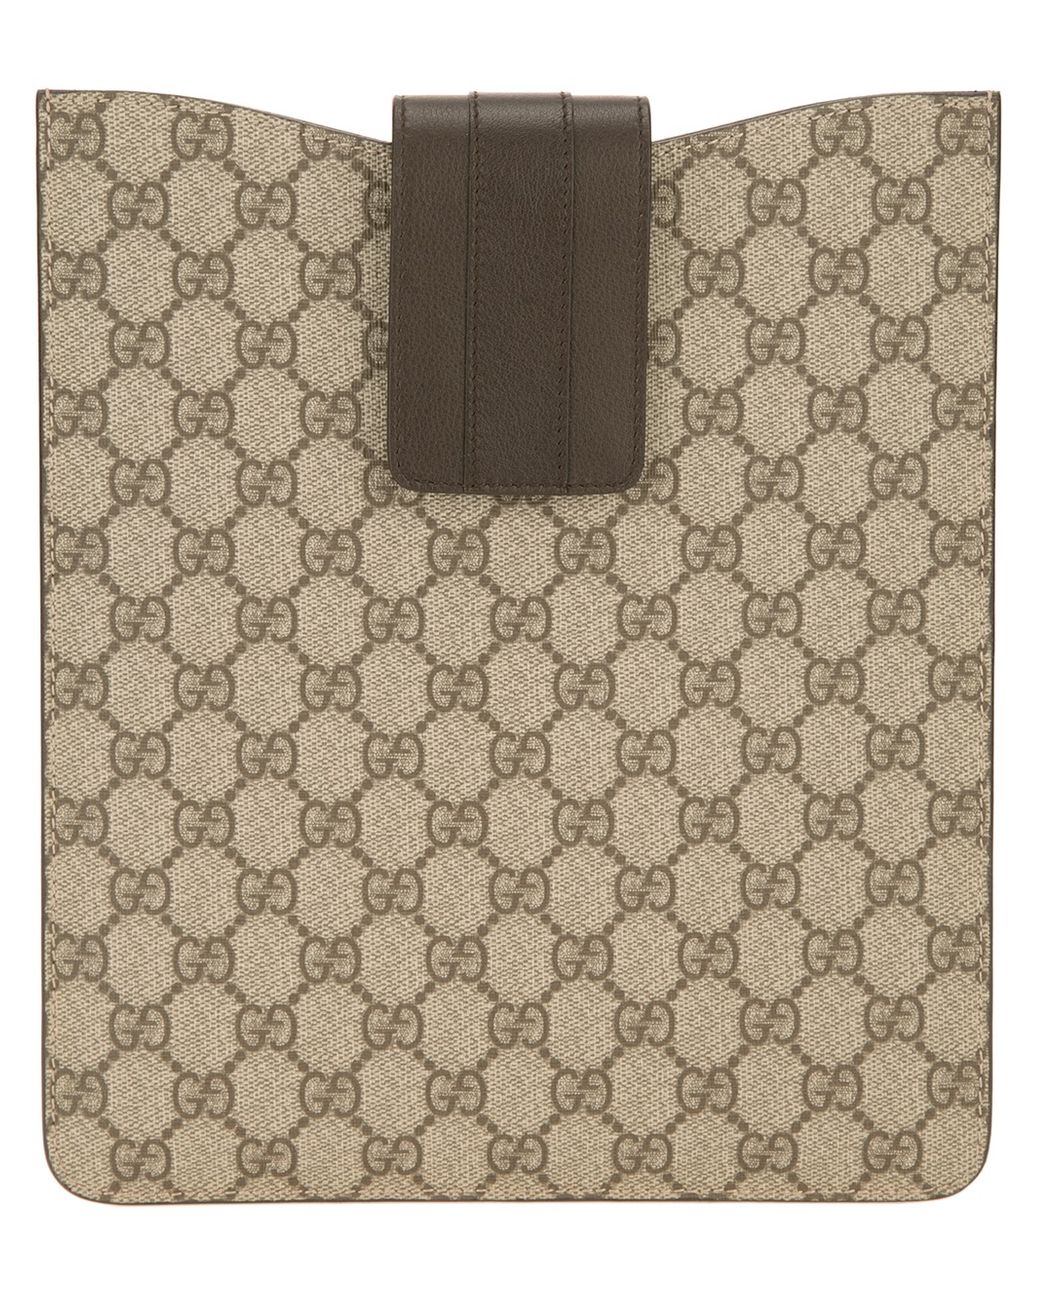 GUCCI Other accessories 325721 ipad tablet case GG Supreme Canvas